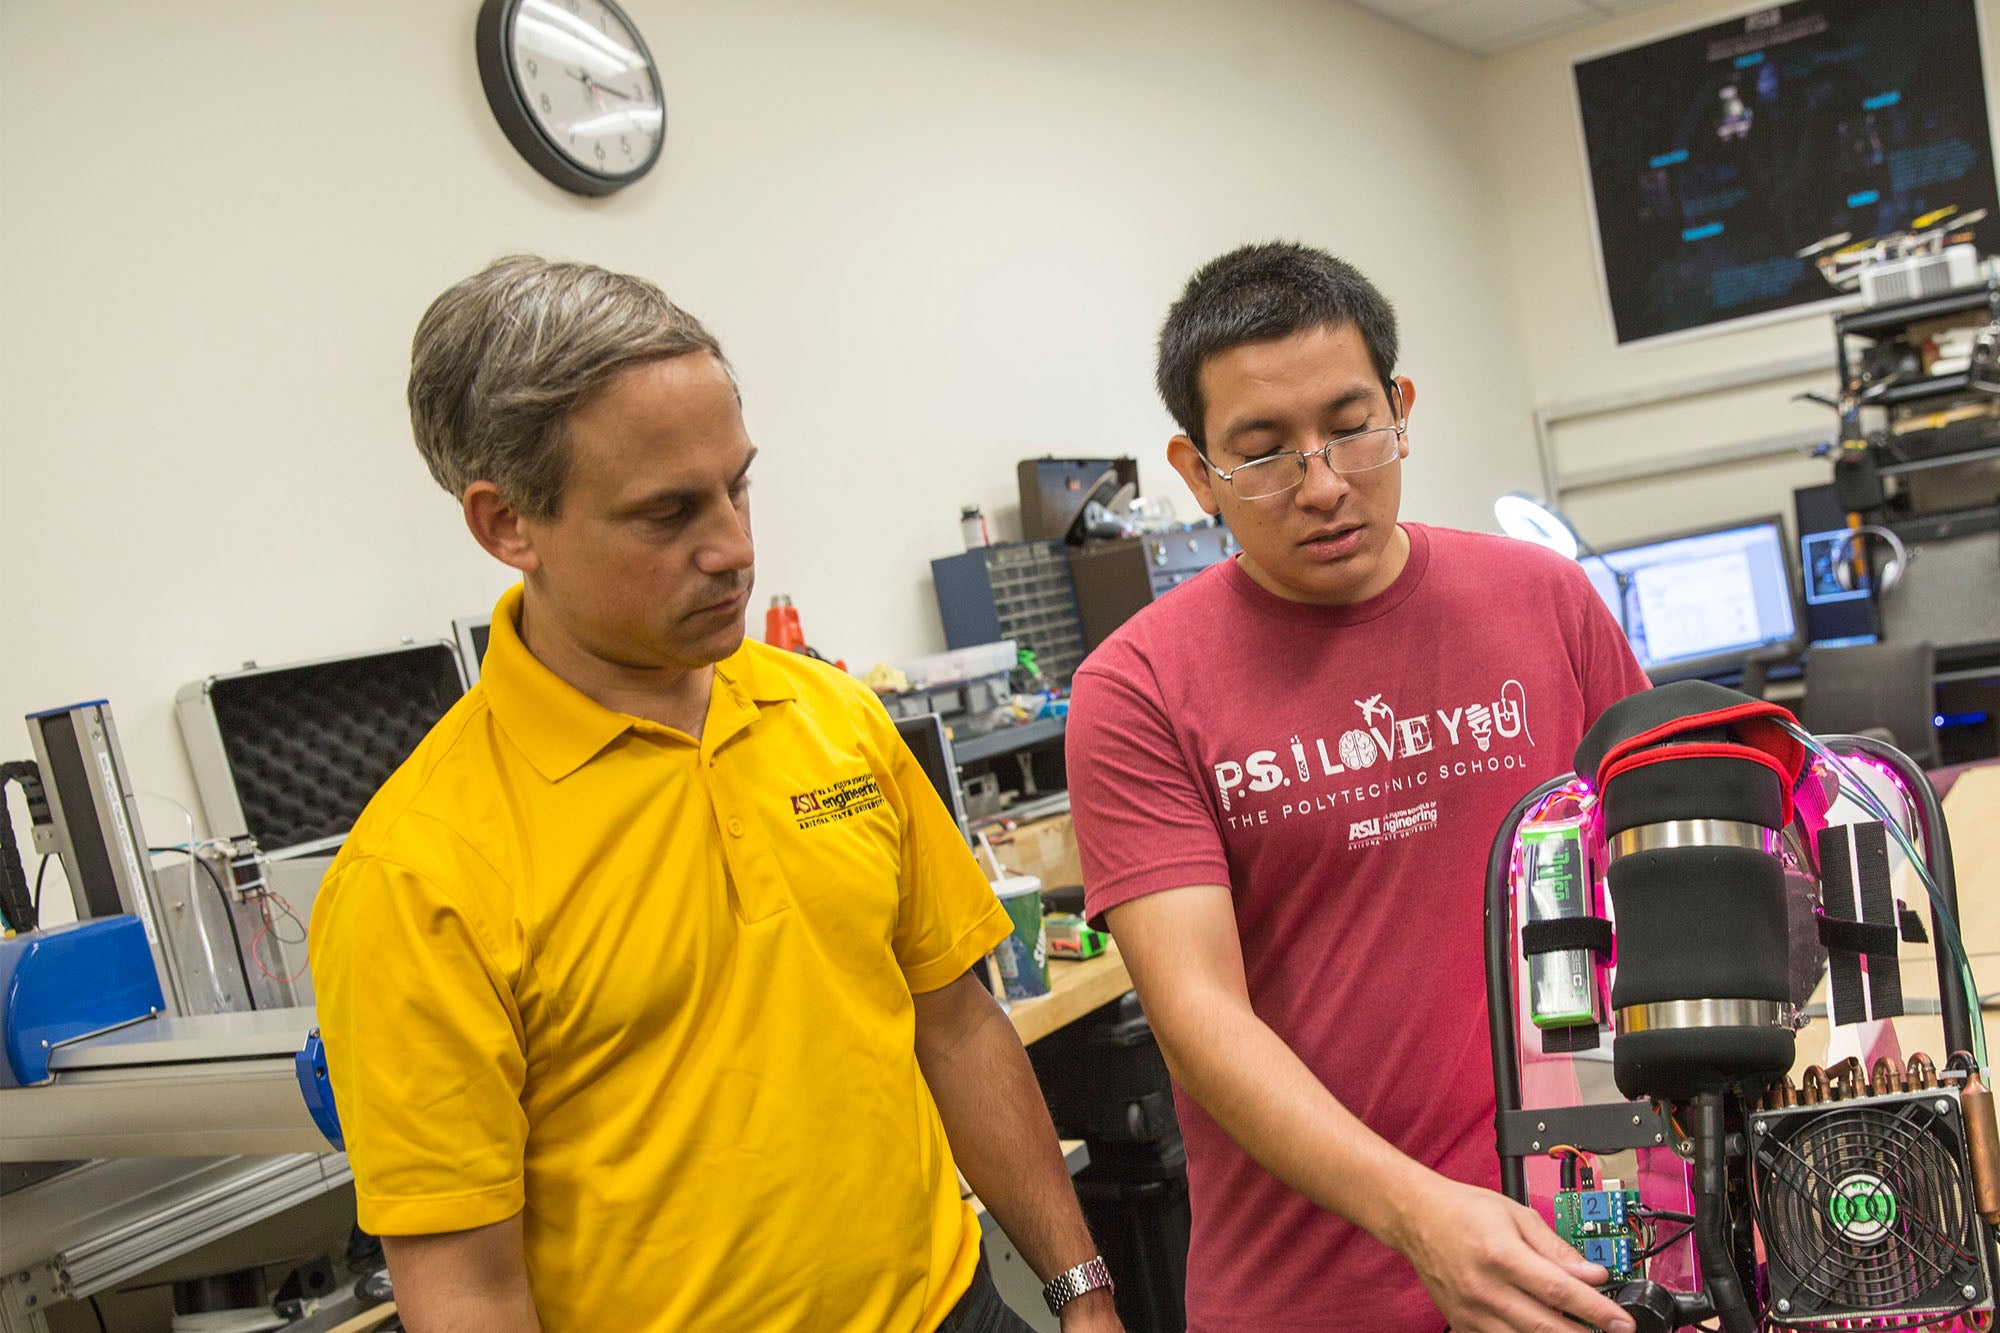 Tom Sugar works with a student on a wearable backpack-style device in his lab